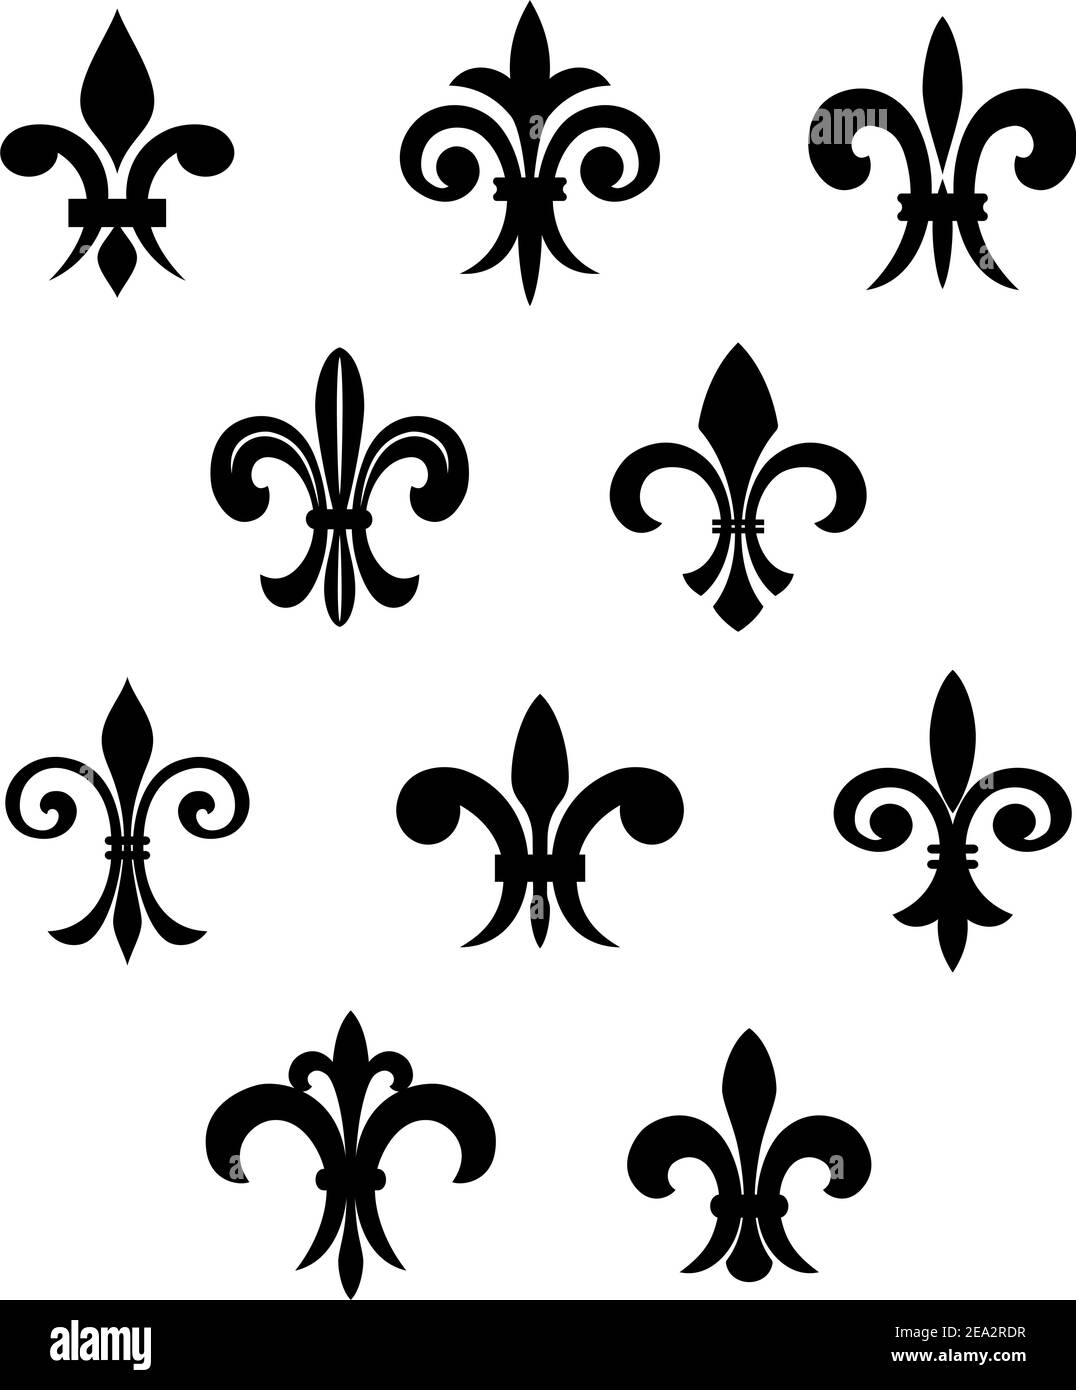 Royal french lily symbols for design and decorate Stock Vector Image ...